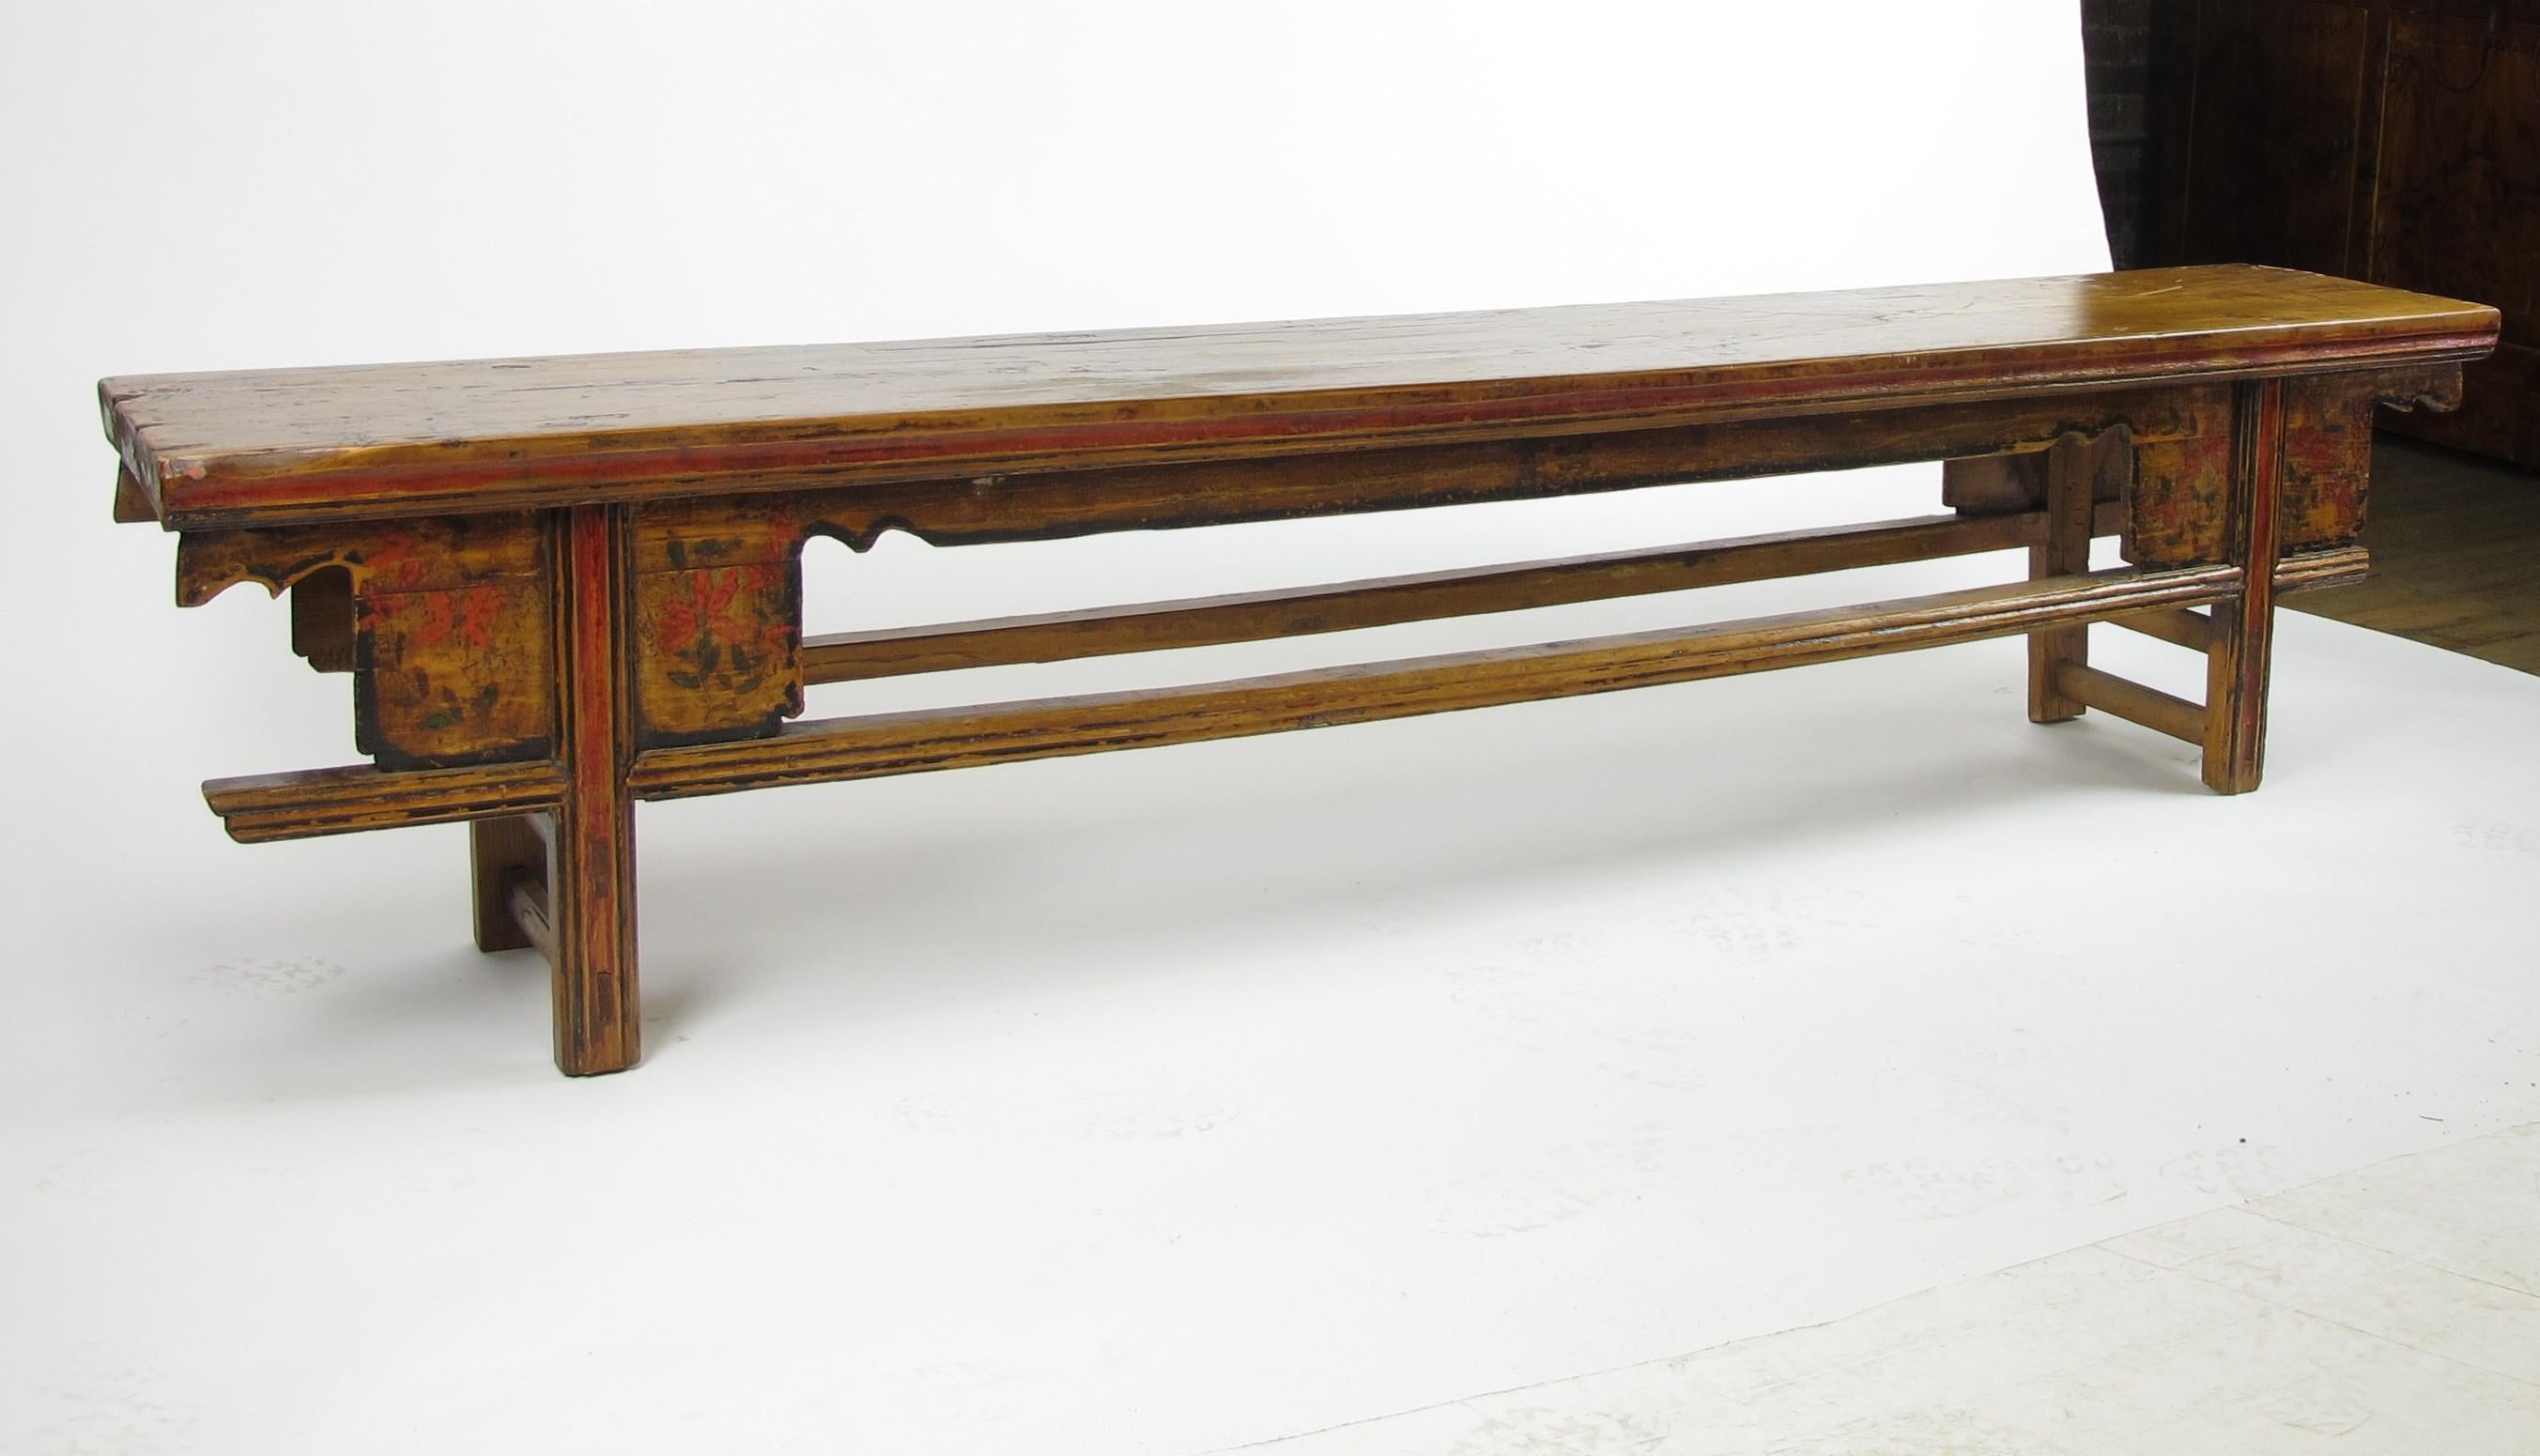 This long narrow wood table was used as a bench by a farmer’s family from the village in Gansu Province, measuring 72.8 in length, 12.2 in width, and 20.9 in height. The top of this bench was made of one solid piece of elm, showing nicely aged warm